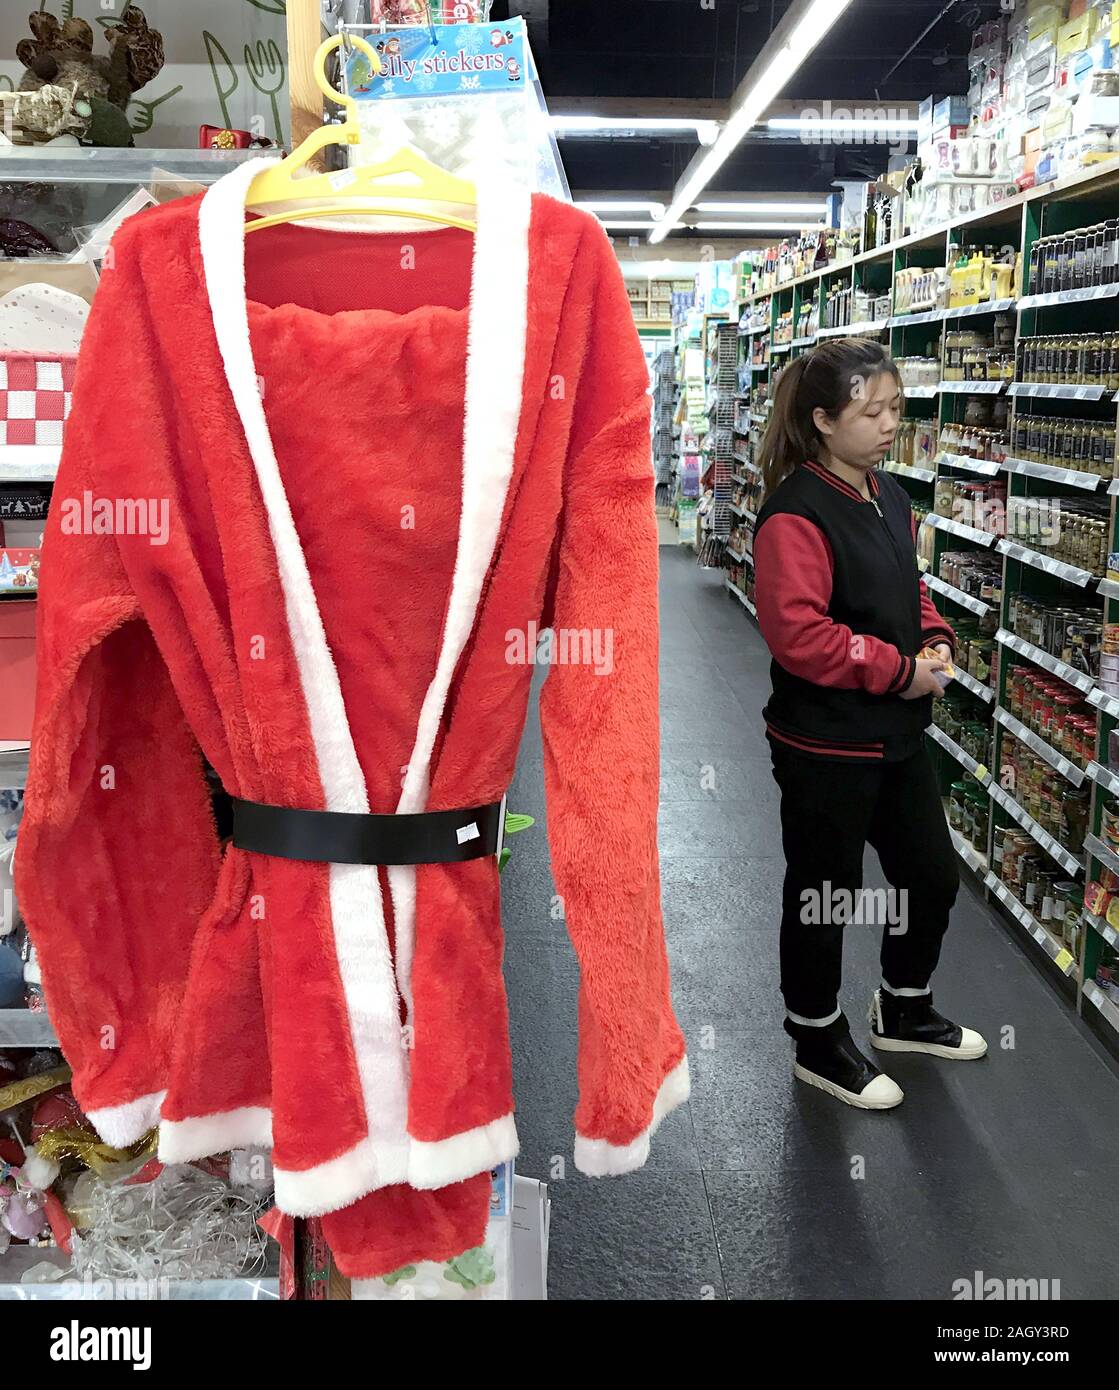 Beijing, China. 22nd Dec, 2019. A Chinese worker checks the shelves of an international supermarket, catering to the holidays with Christmas specials and gifts, in downtown Beijing on Sunday, December 22, 2019. Christmas has become a very popular holiday celebrating family, food and shopping in China. Photo by Stephen Shaver/UPI Credit: UPI/Alamy Live News Stock Photo